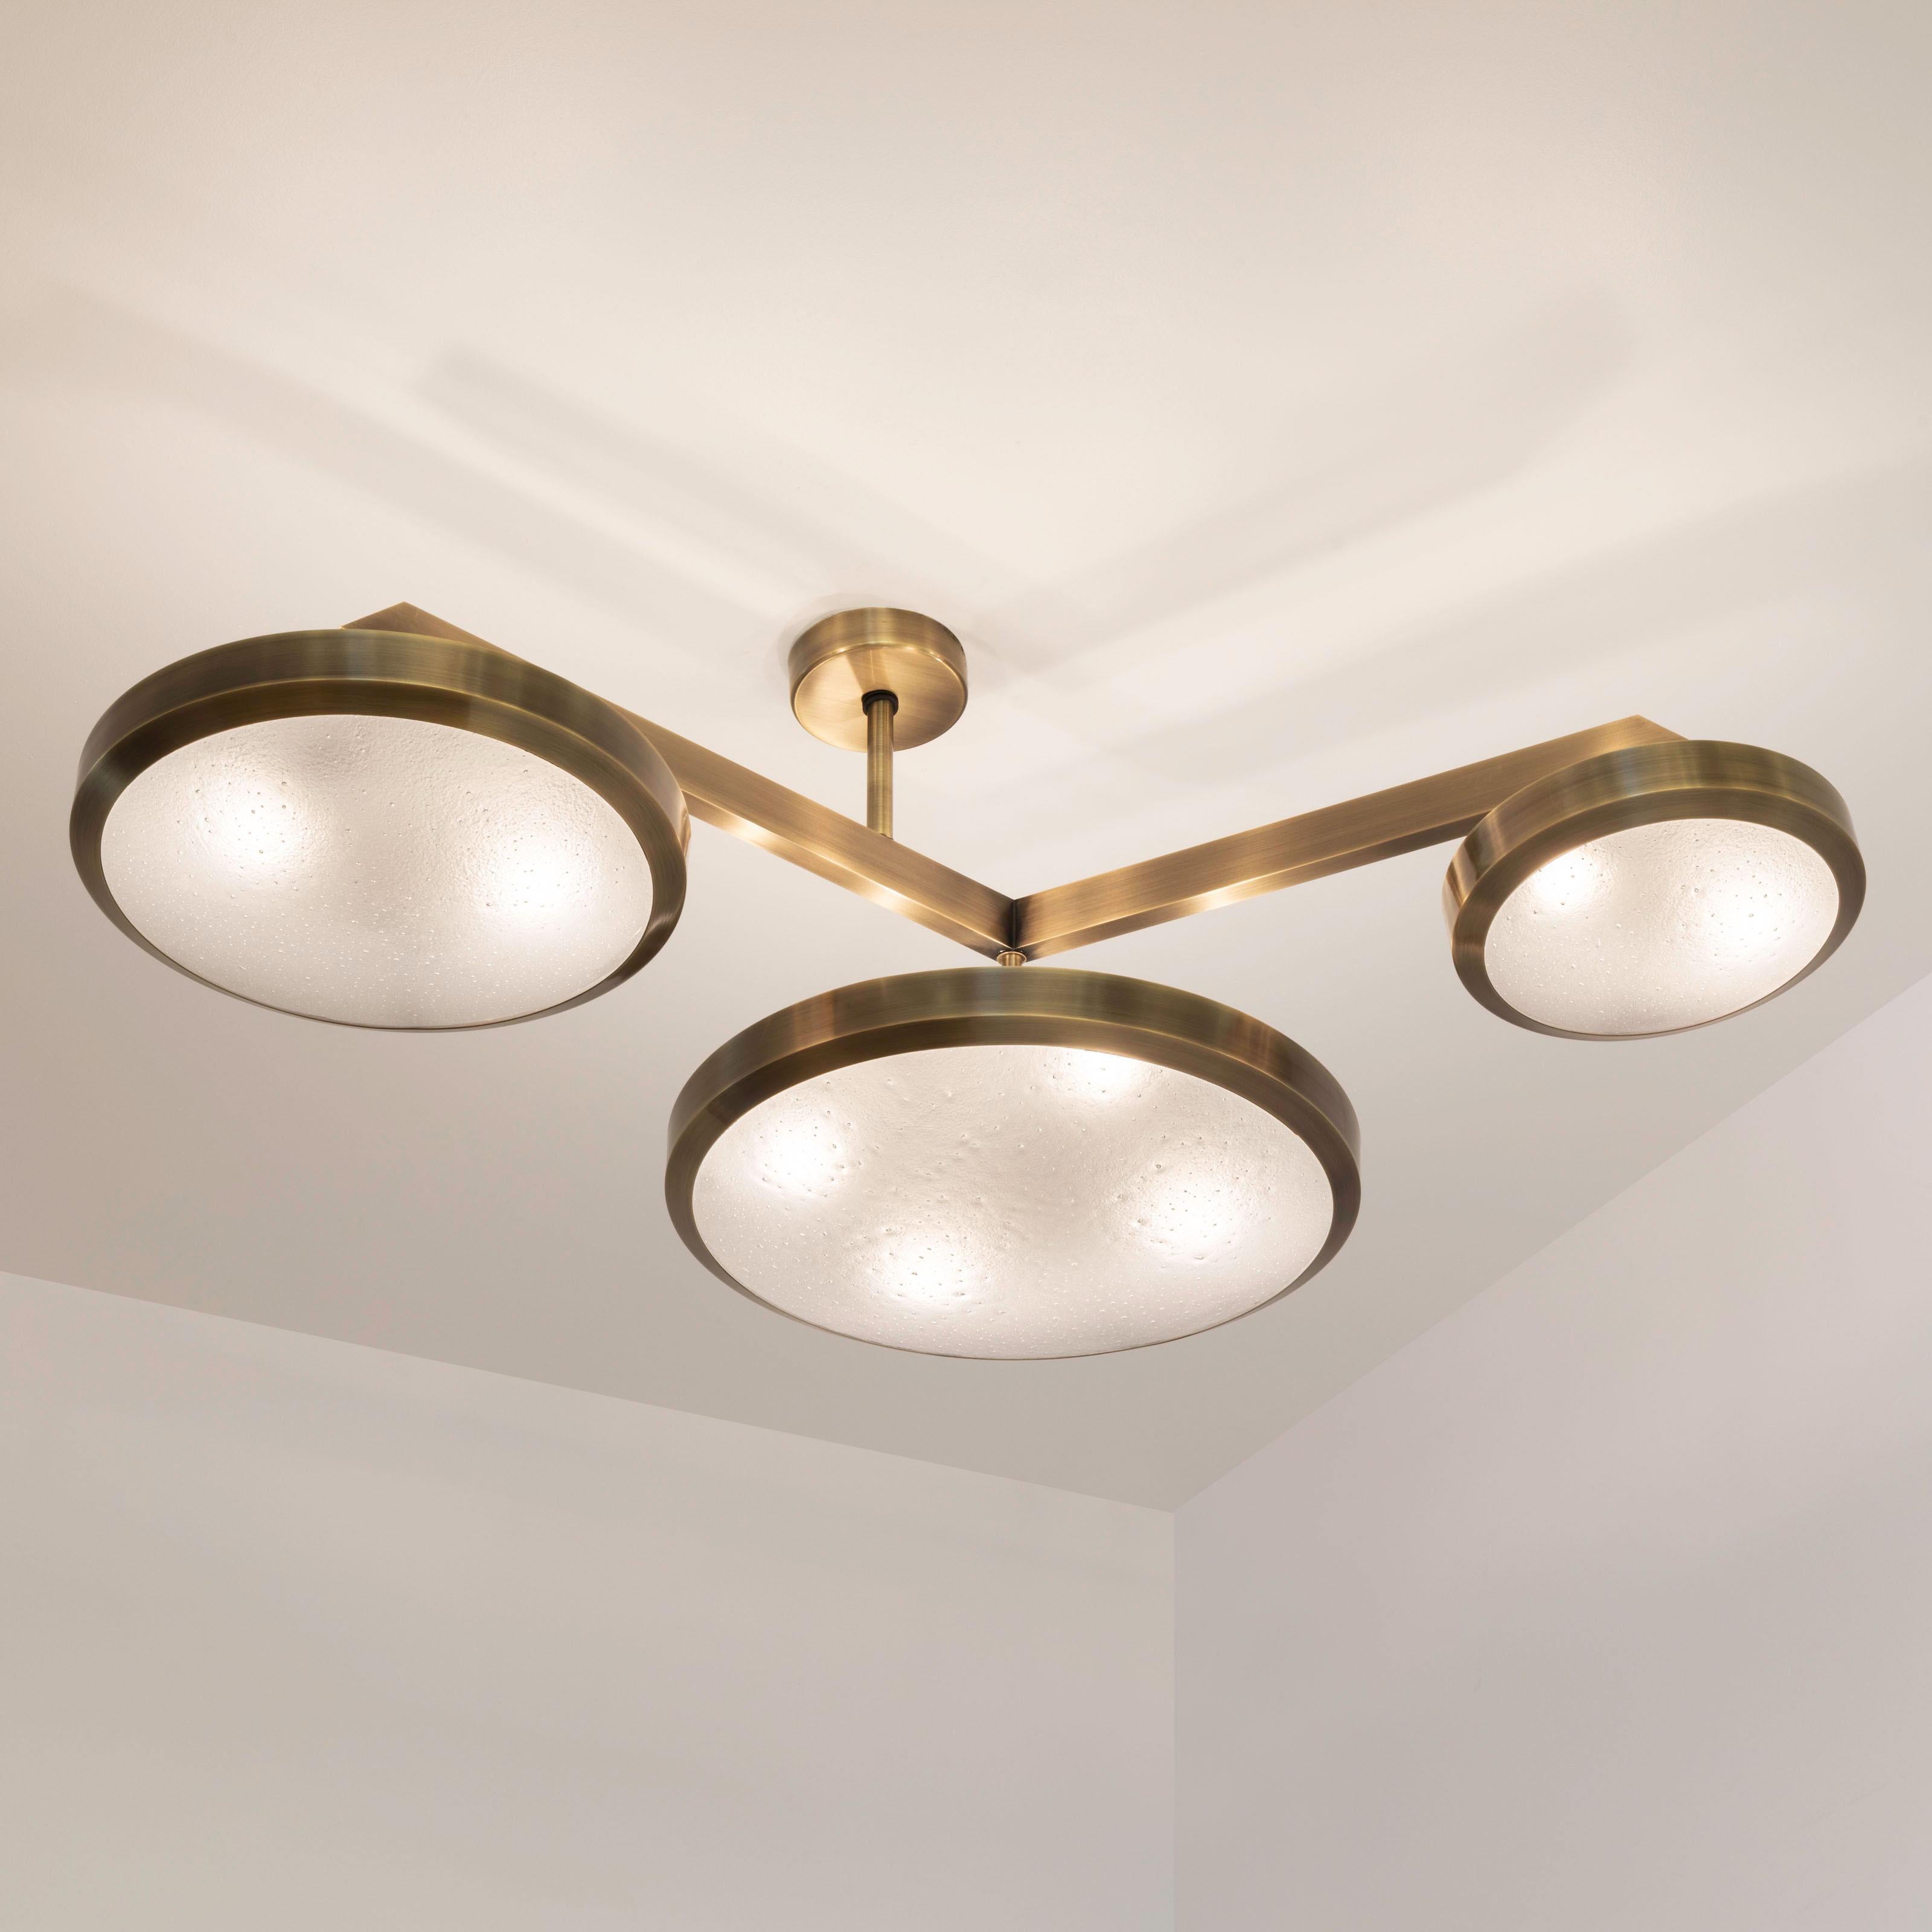 Contemporary Zeta Ceiling Light by Gaspare Asaro - Polished Nickel Finish For Sale